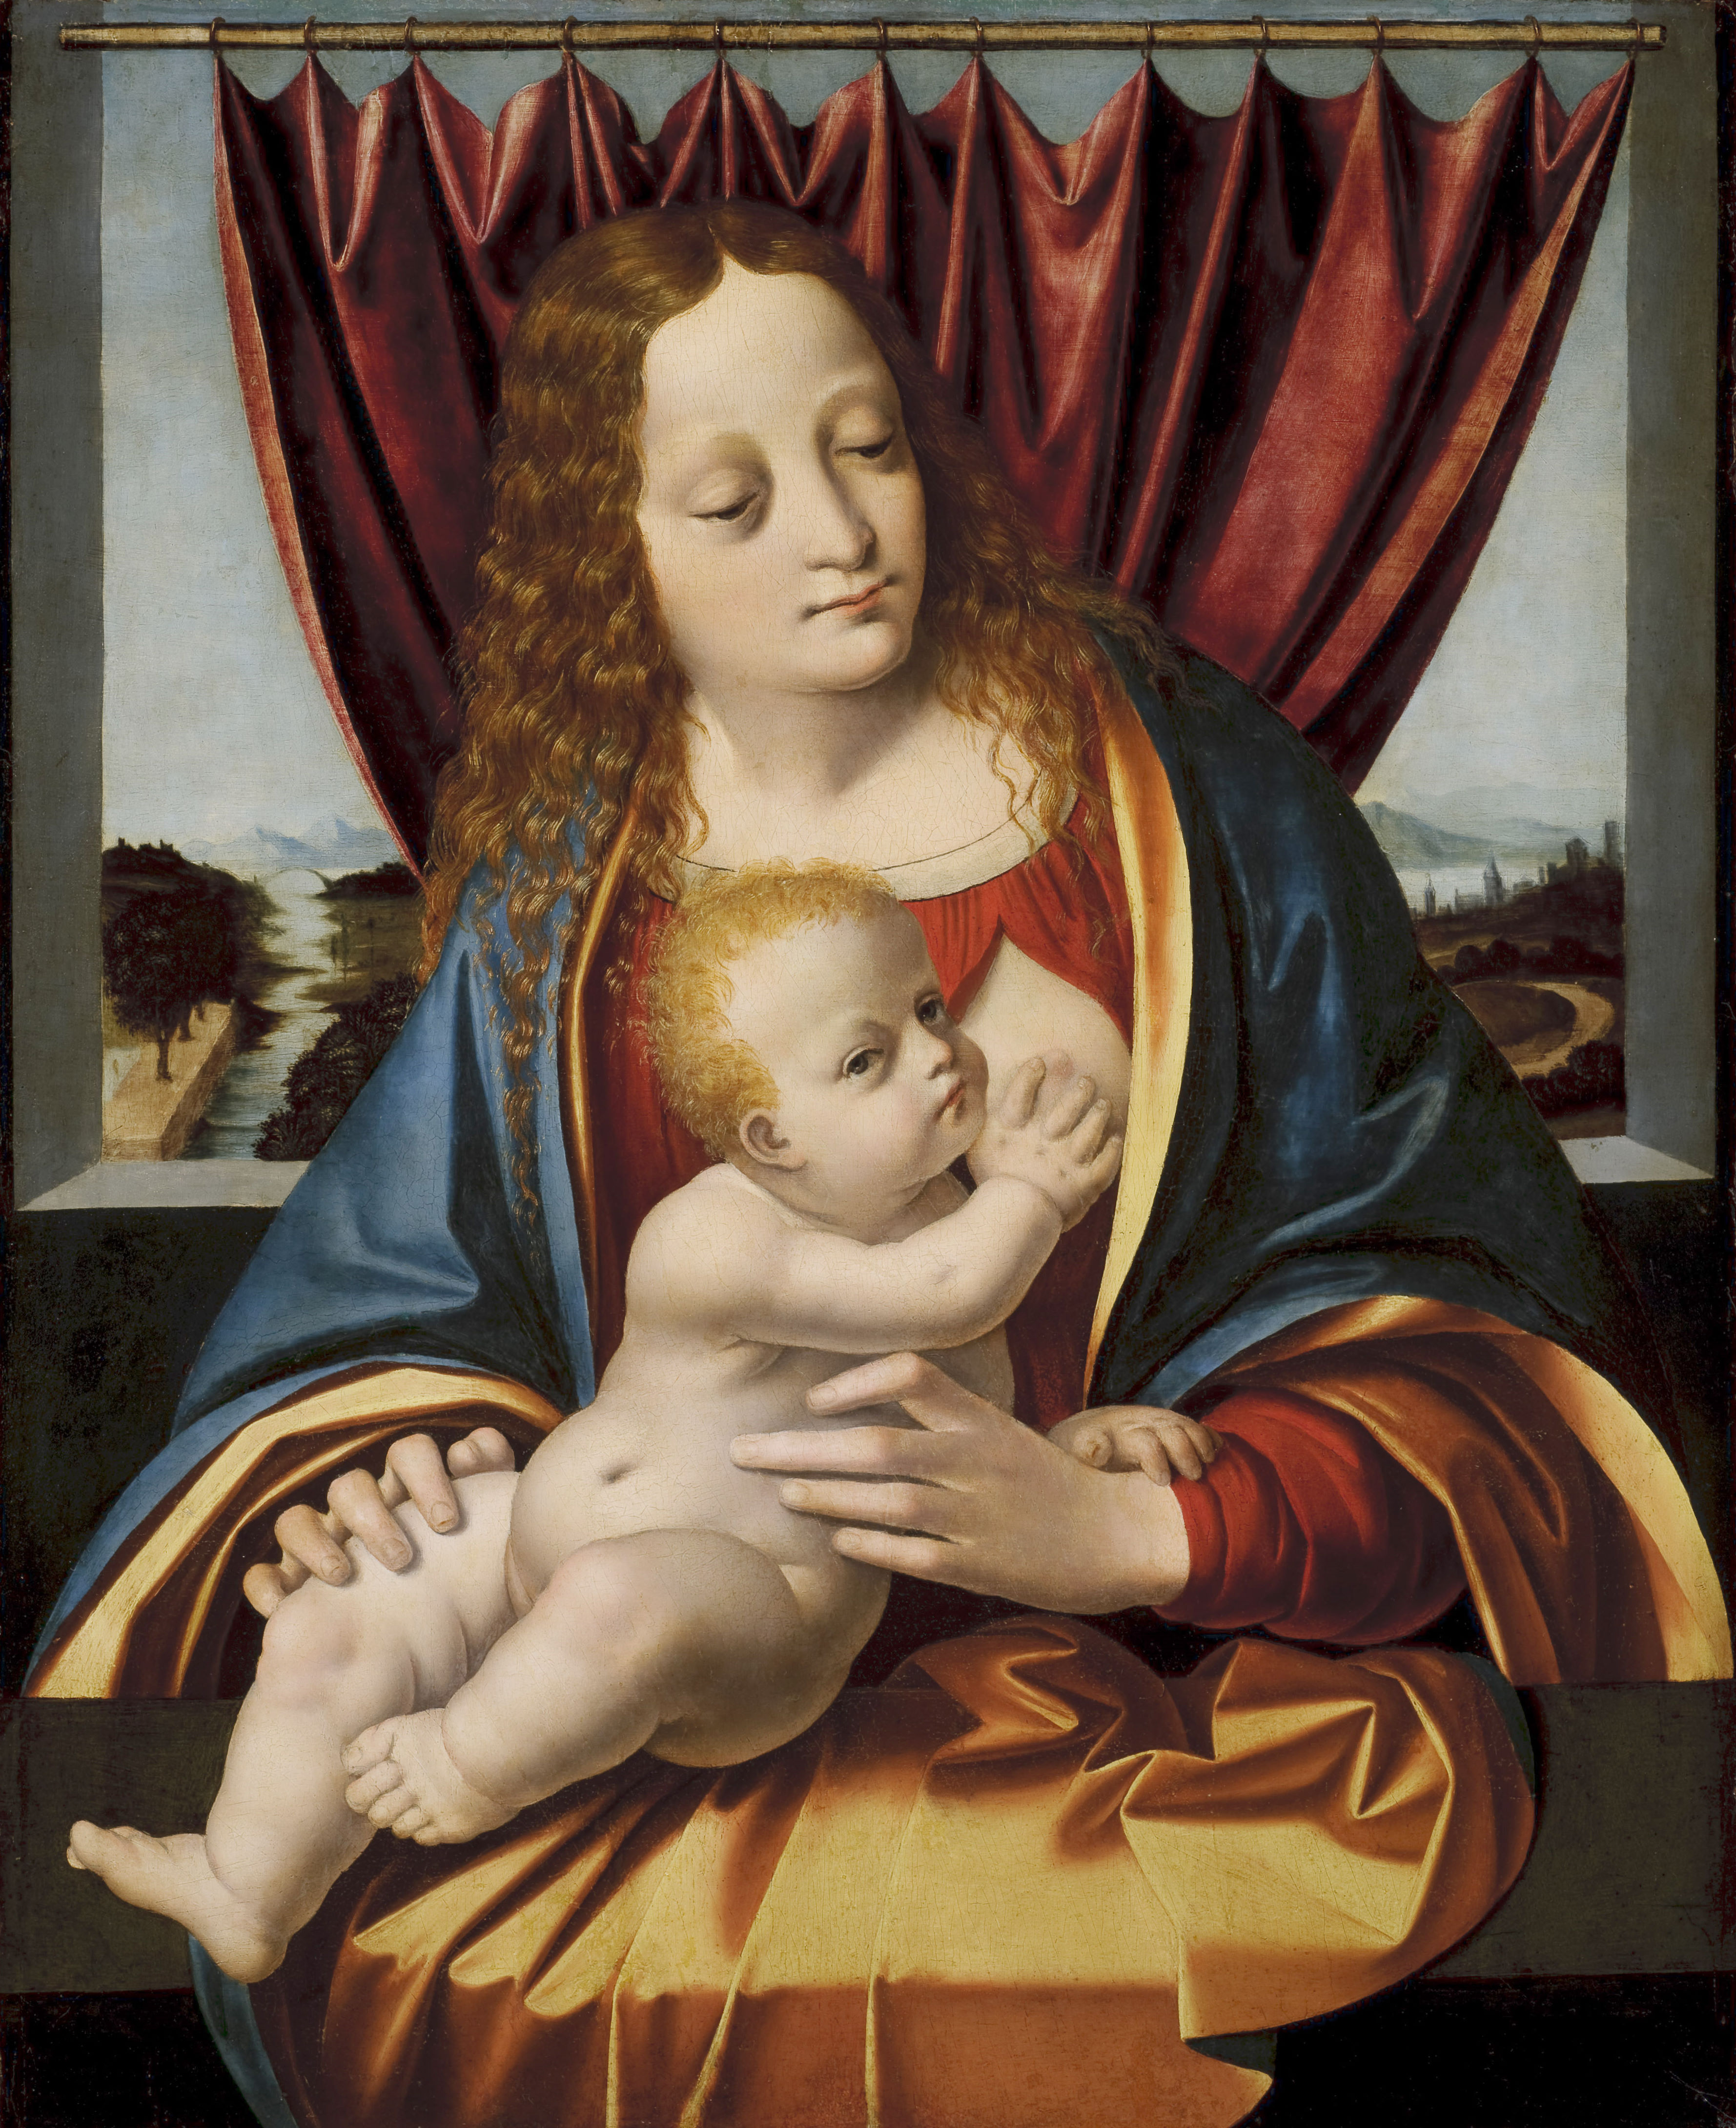 <p><strong>Marco d&rsquo;Oggiono</strong>&nbsp;<em>Madonna and Child&nbsp;</em>c.1490, tempera on panel, Mackelvie Trust Collection, Auckland Art Gallery Toi o Tāmaki, purchased with the assistance of the National Art Collection Fund, 1966</p>
